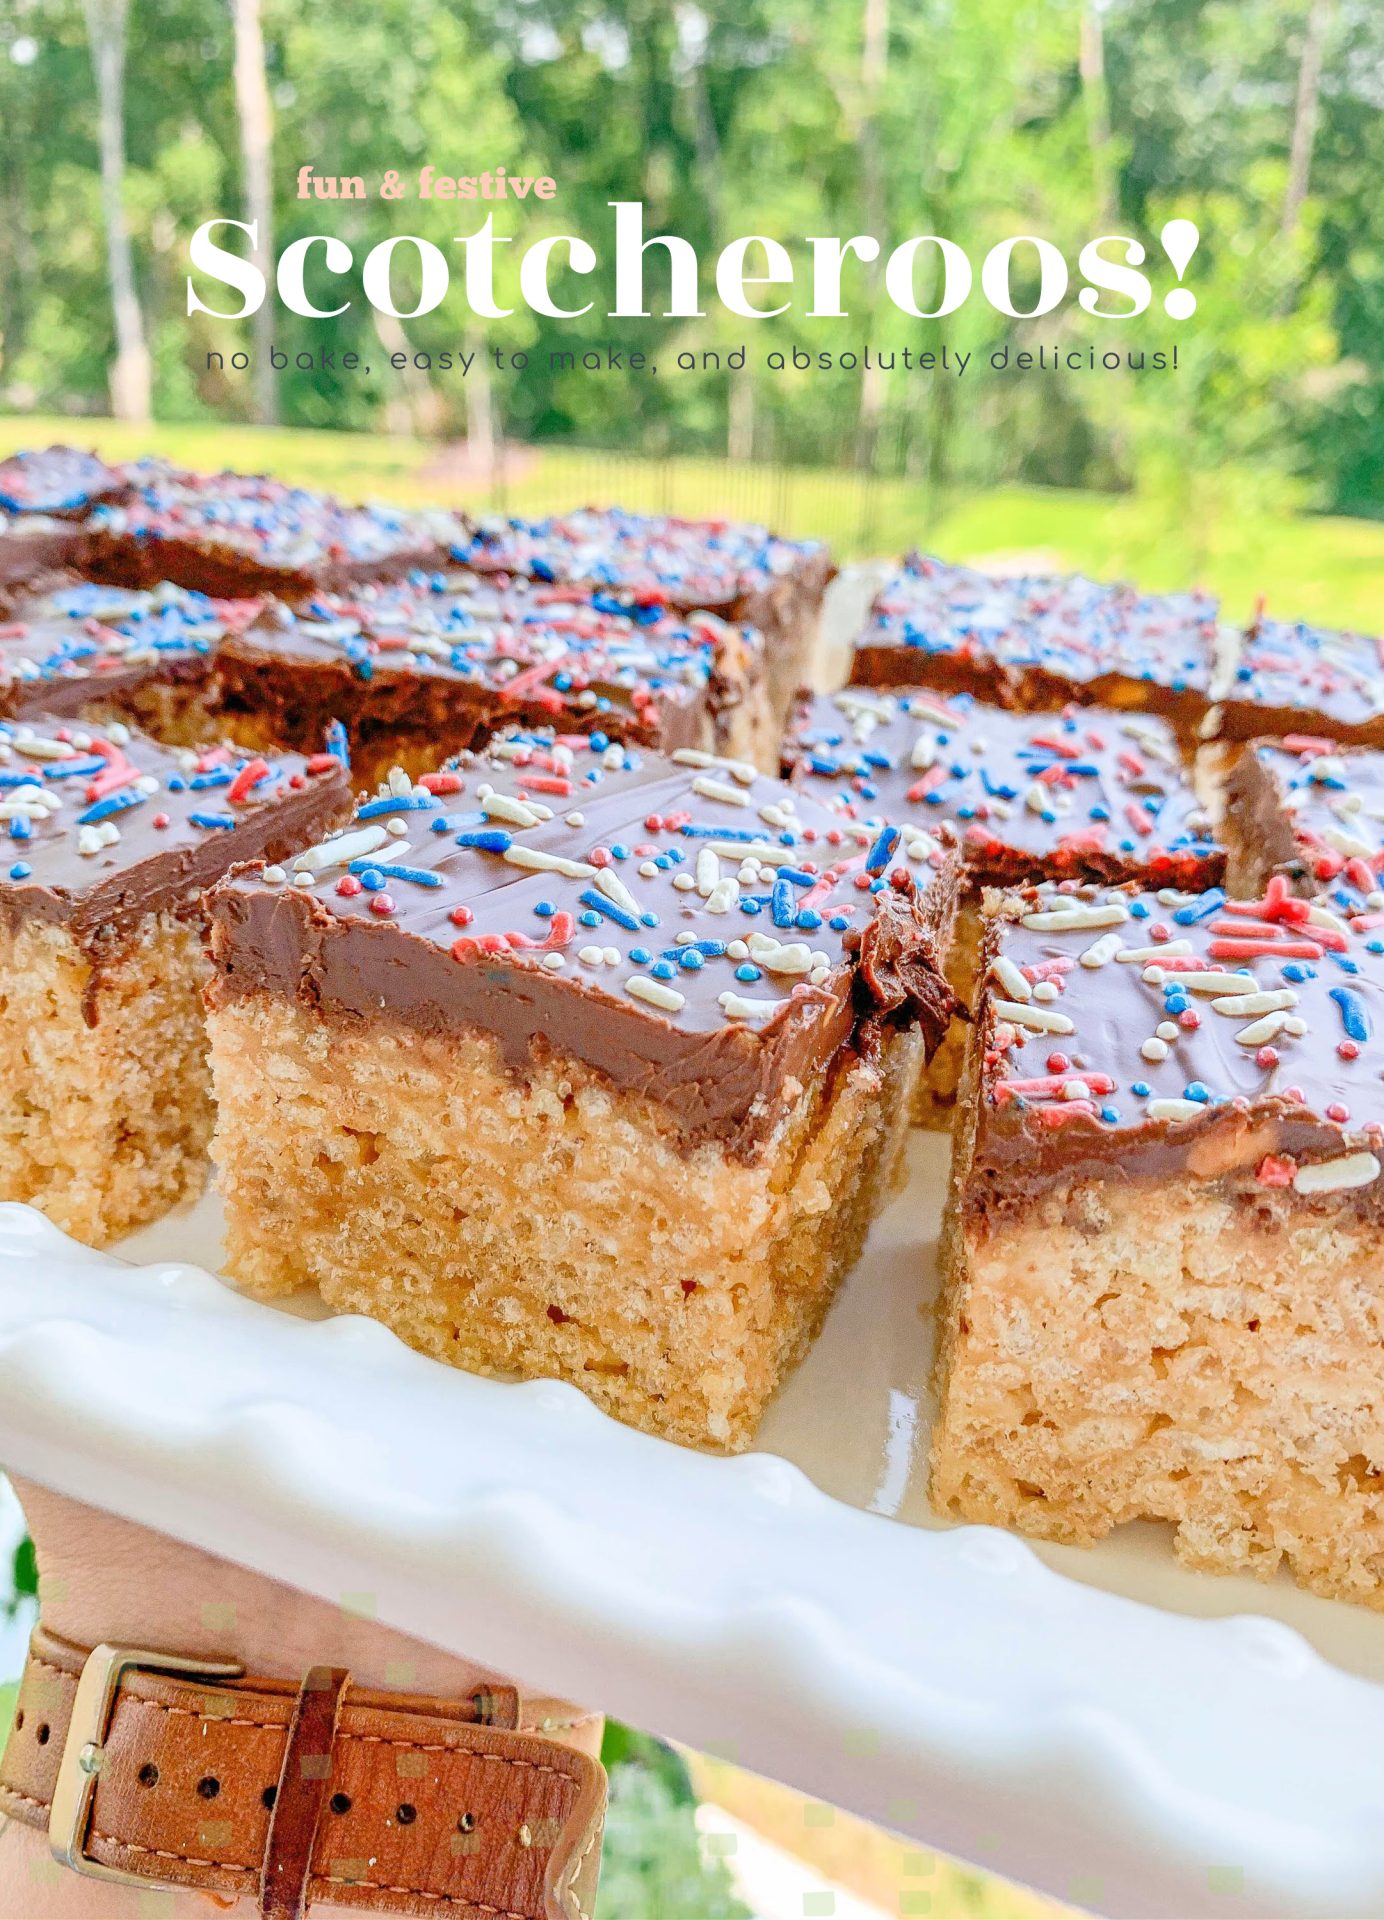 Scotcheroos, 4th of July, Rice Krispies, Red White and Blue Dessert, Scotcharoo recipe, holiday, July, memorial day, Labor Day, peanut butter Rice Krispies, chocolate peanut butter Rice Krispies, summer treats, no bake